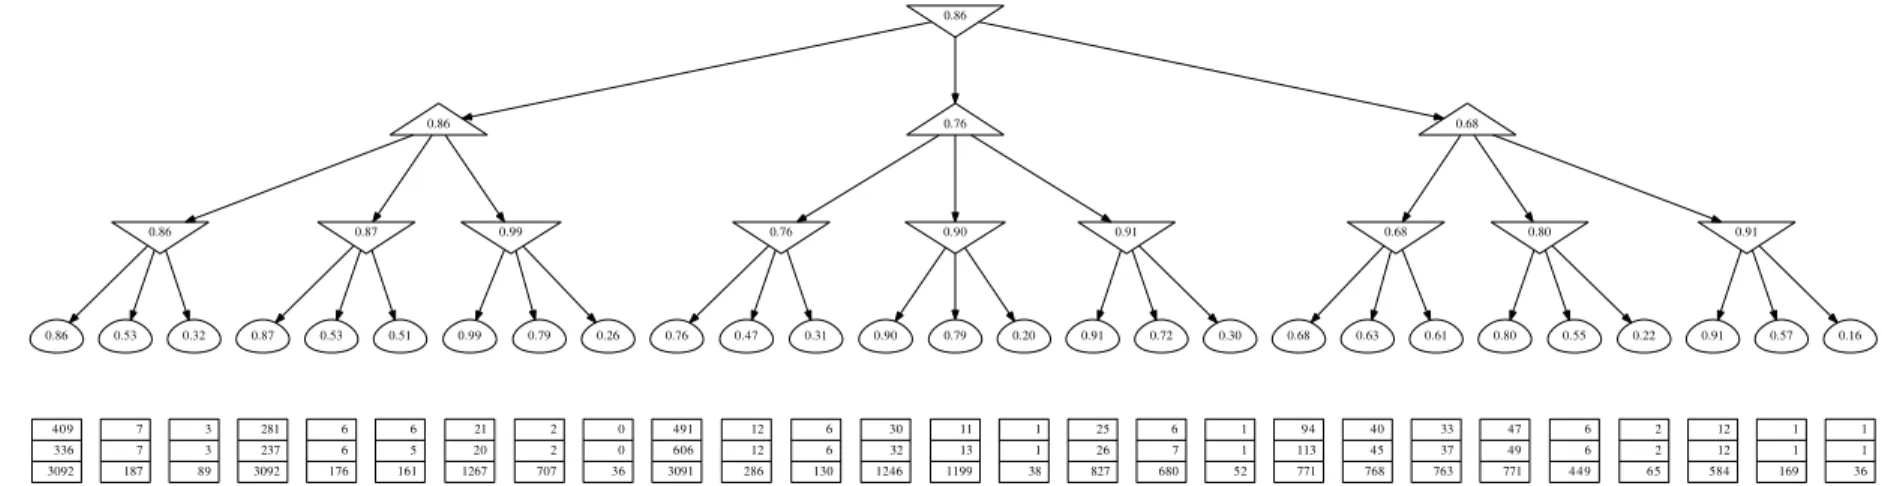 Figure 4: Our benchmark 3-way tree of depth 3. Shown below the leaves are the numbers of pulls of 3 algorithms: LUCB-MCTS (0.72% errors, 1551 samples), UGapE-MCTS (0.75%, 1584), and FindTopWinner (0%, 20730)